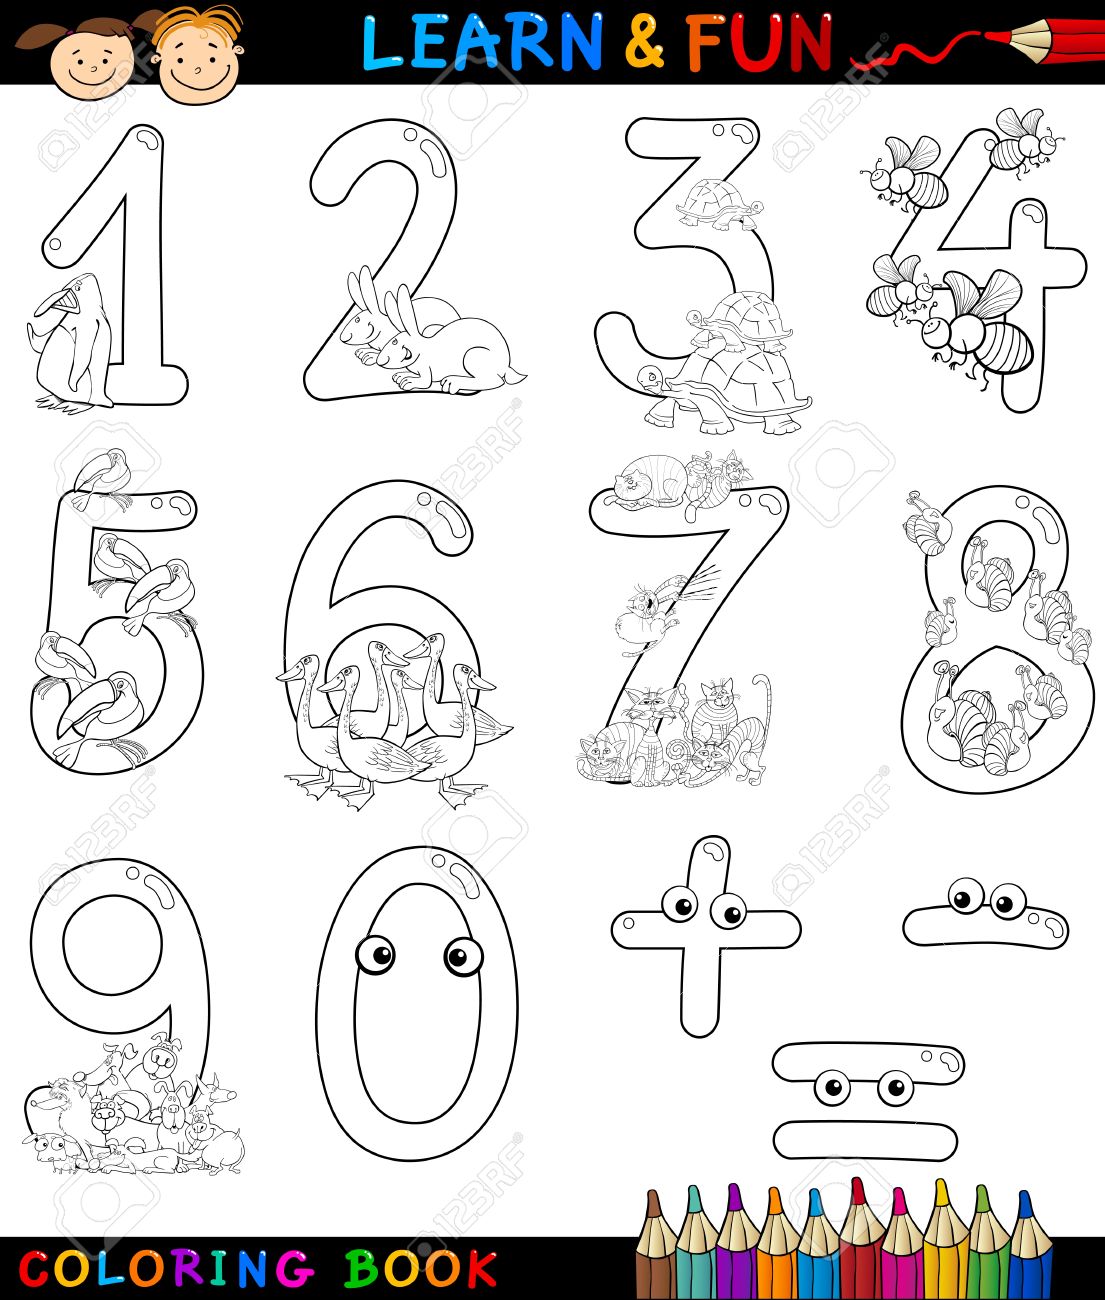 Cartoon coloring book or page illustration of numbers signs from zero to nine with animals characters for children education and fun royalty free svg cliparts vectors and stock illustration image